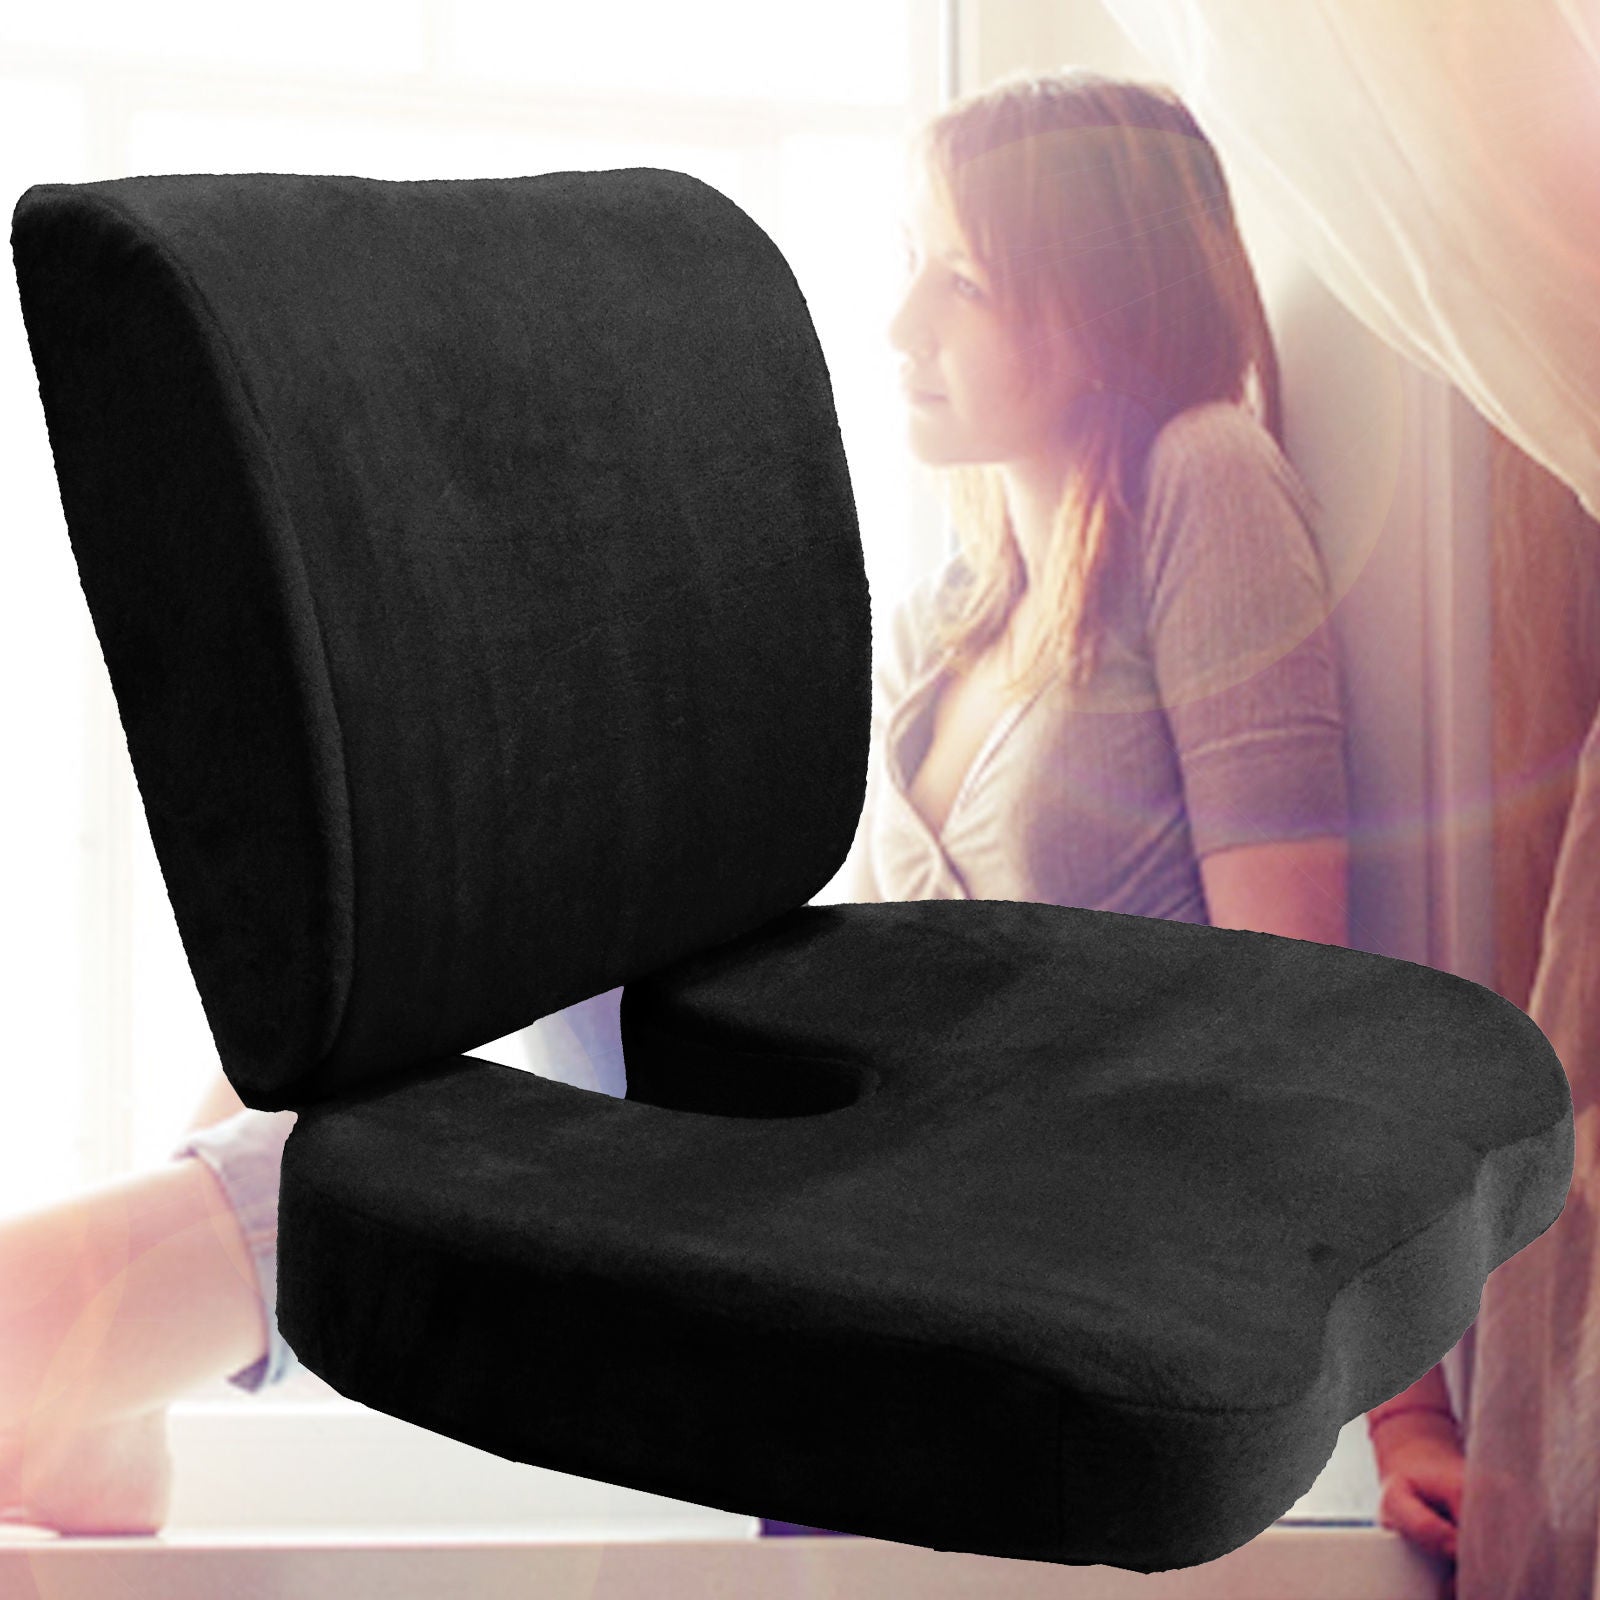 Orthopedic Comfort Memory Foam Coccyx Seat Pad And Back Support